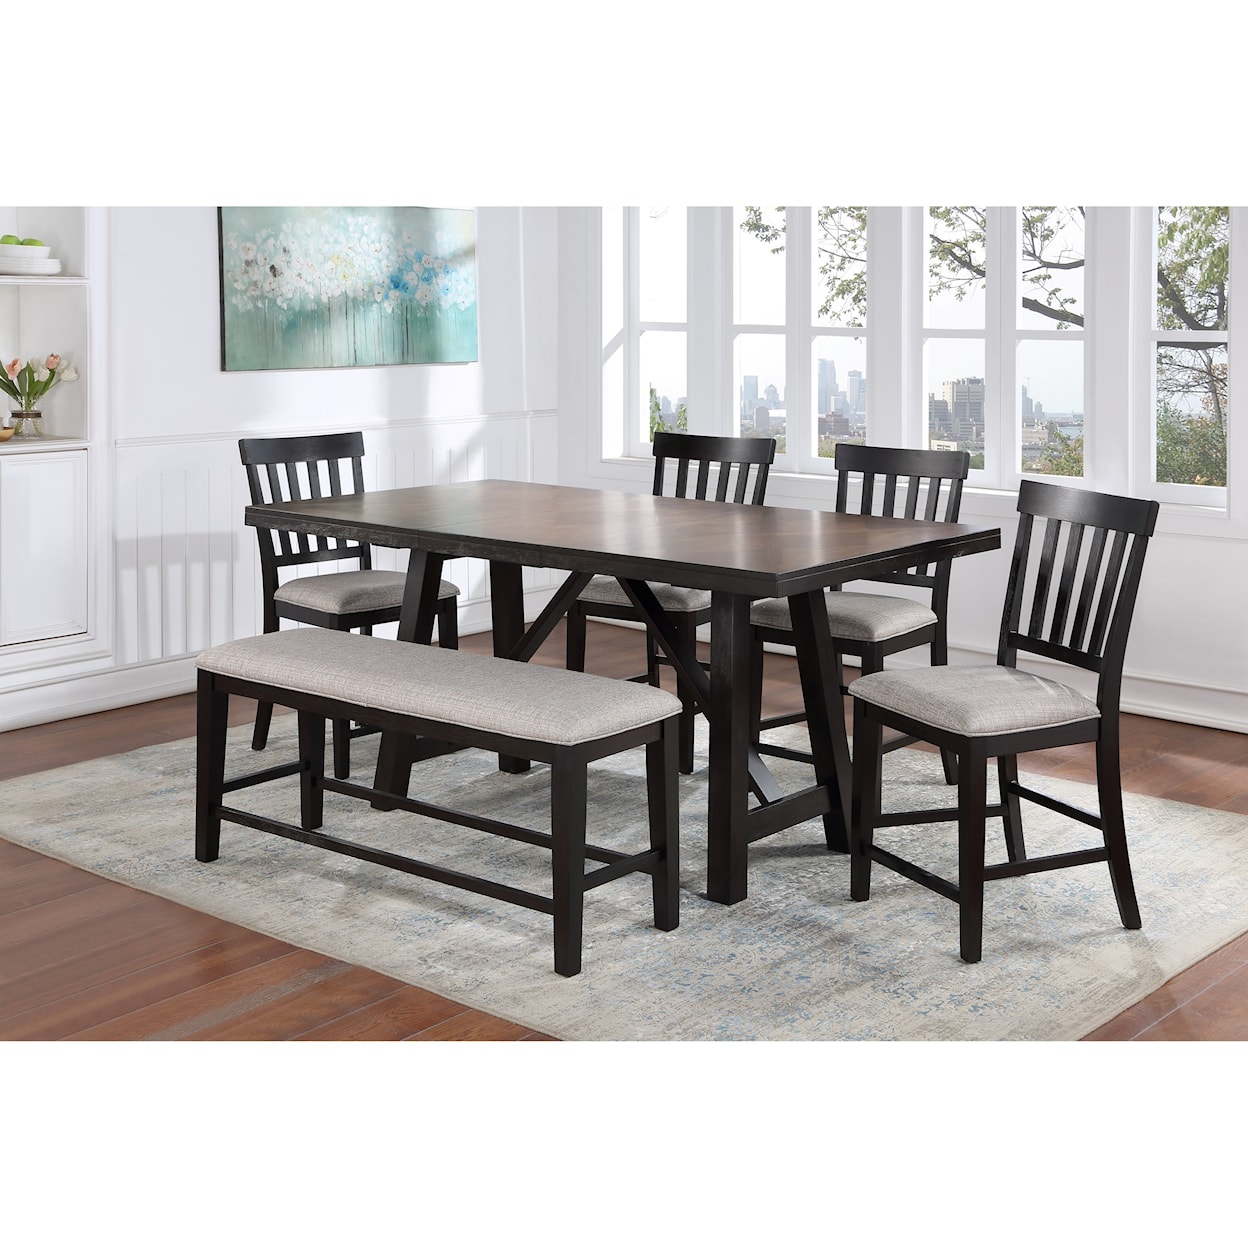 Prime Halle Table & Chair Set with Bench